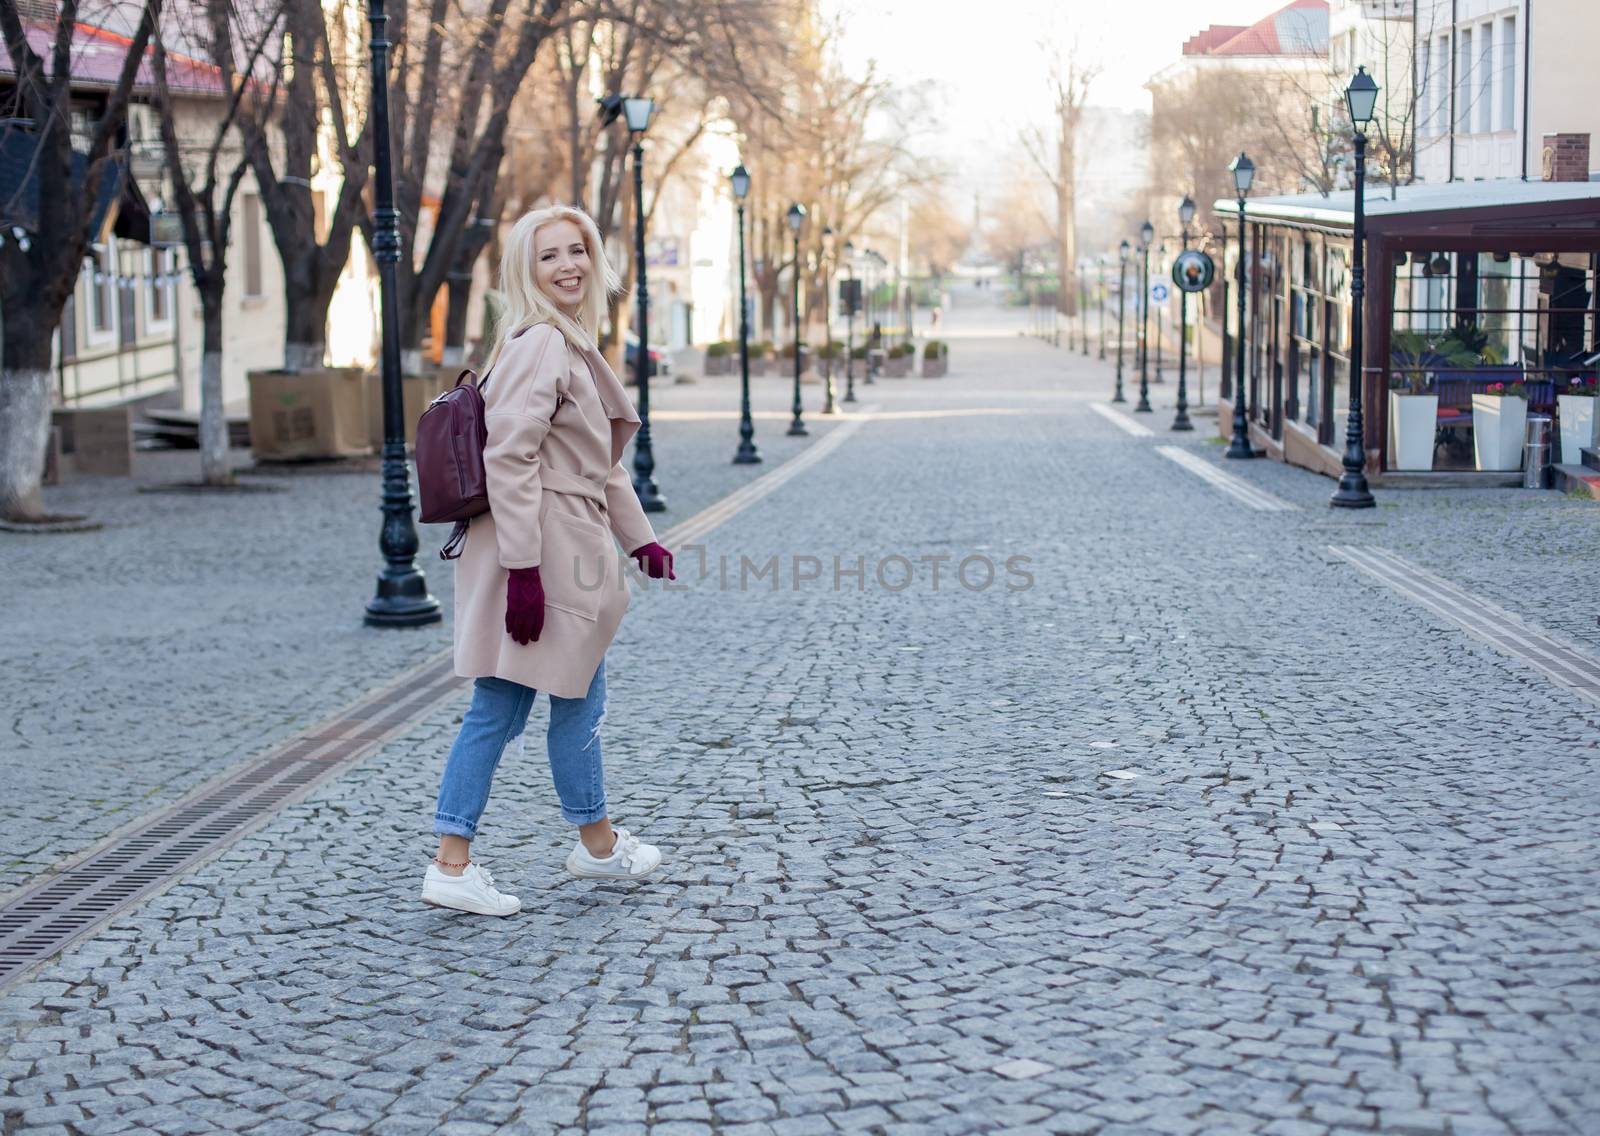 Outdoor of gorgeous woman with blond hair in elegant coat and gloves walking in street by Angel_a